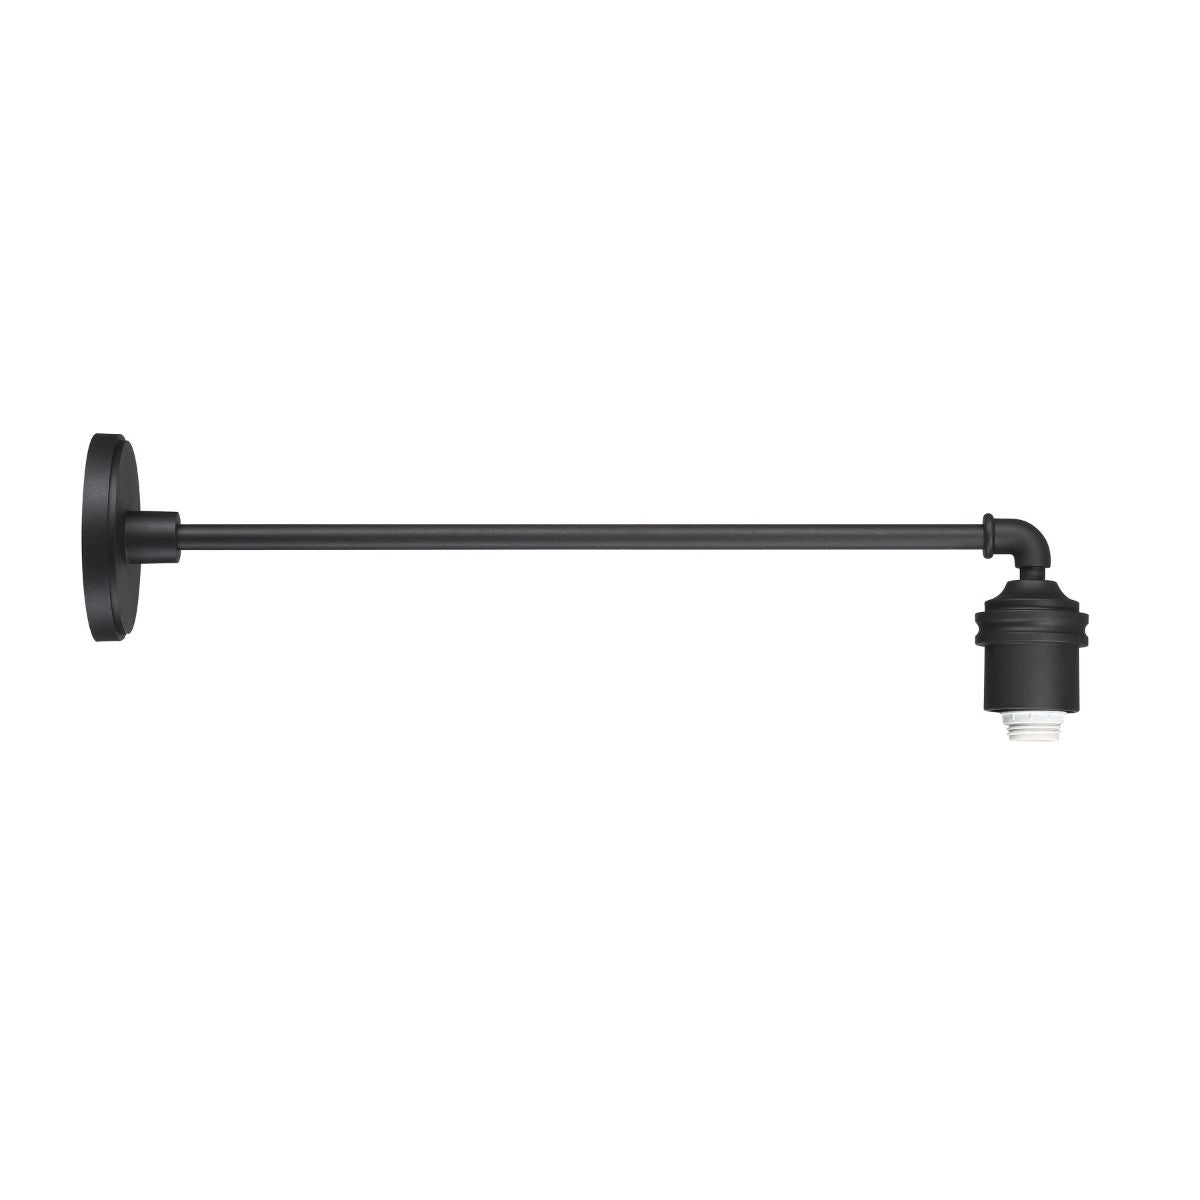 RLM Outdoor Wall Mount 29 In. Straight Arm Black Finish